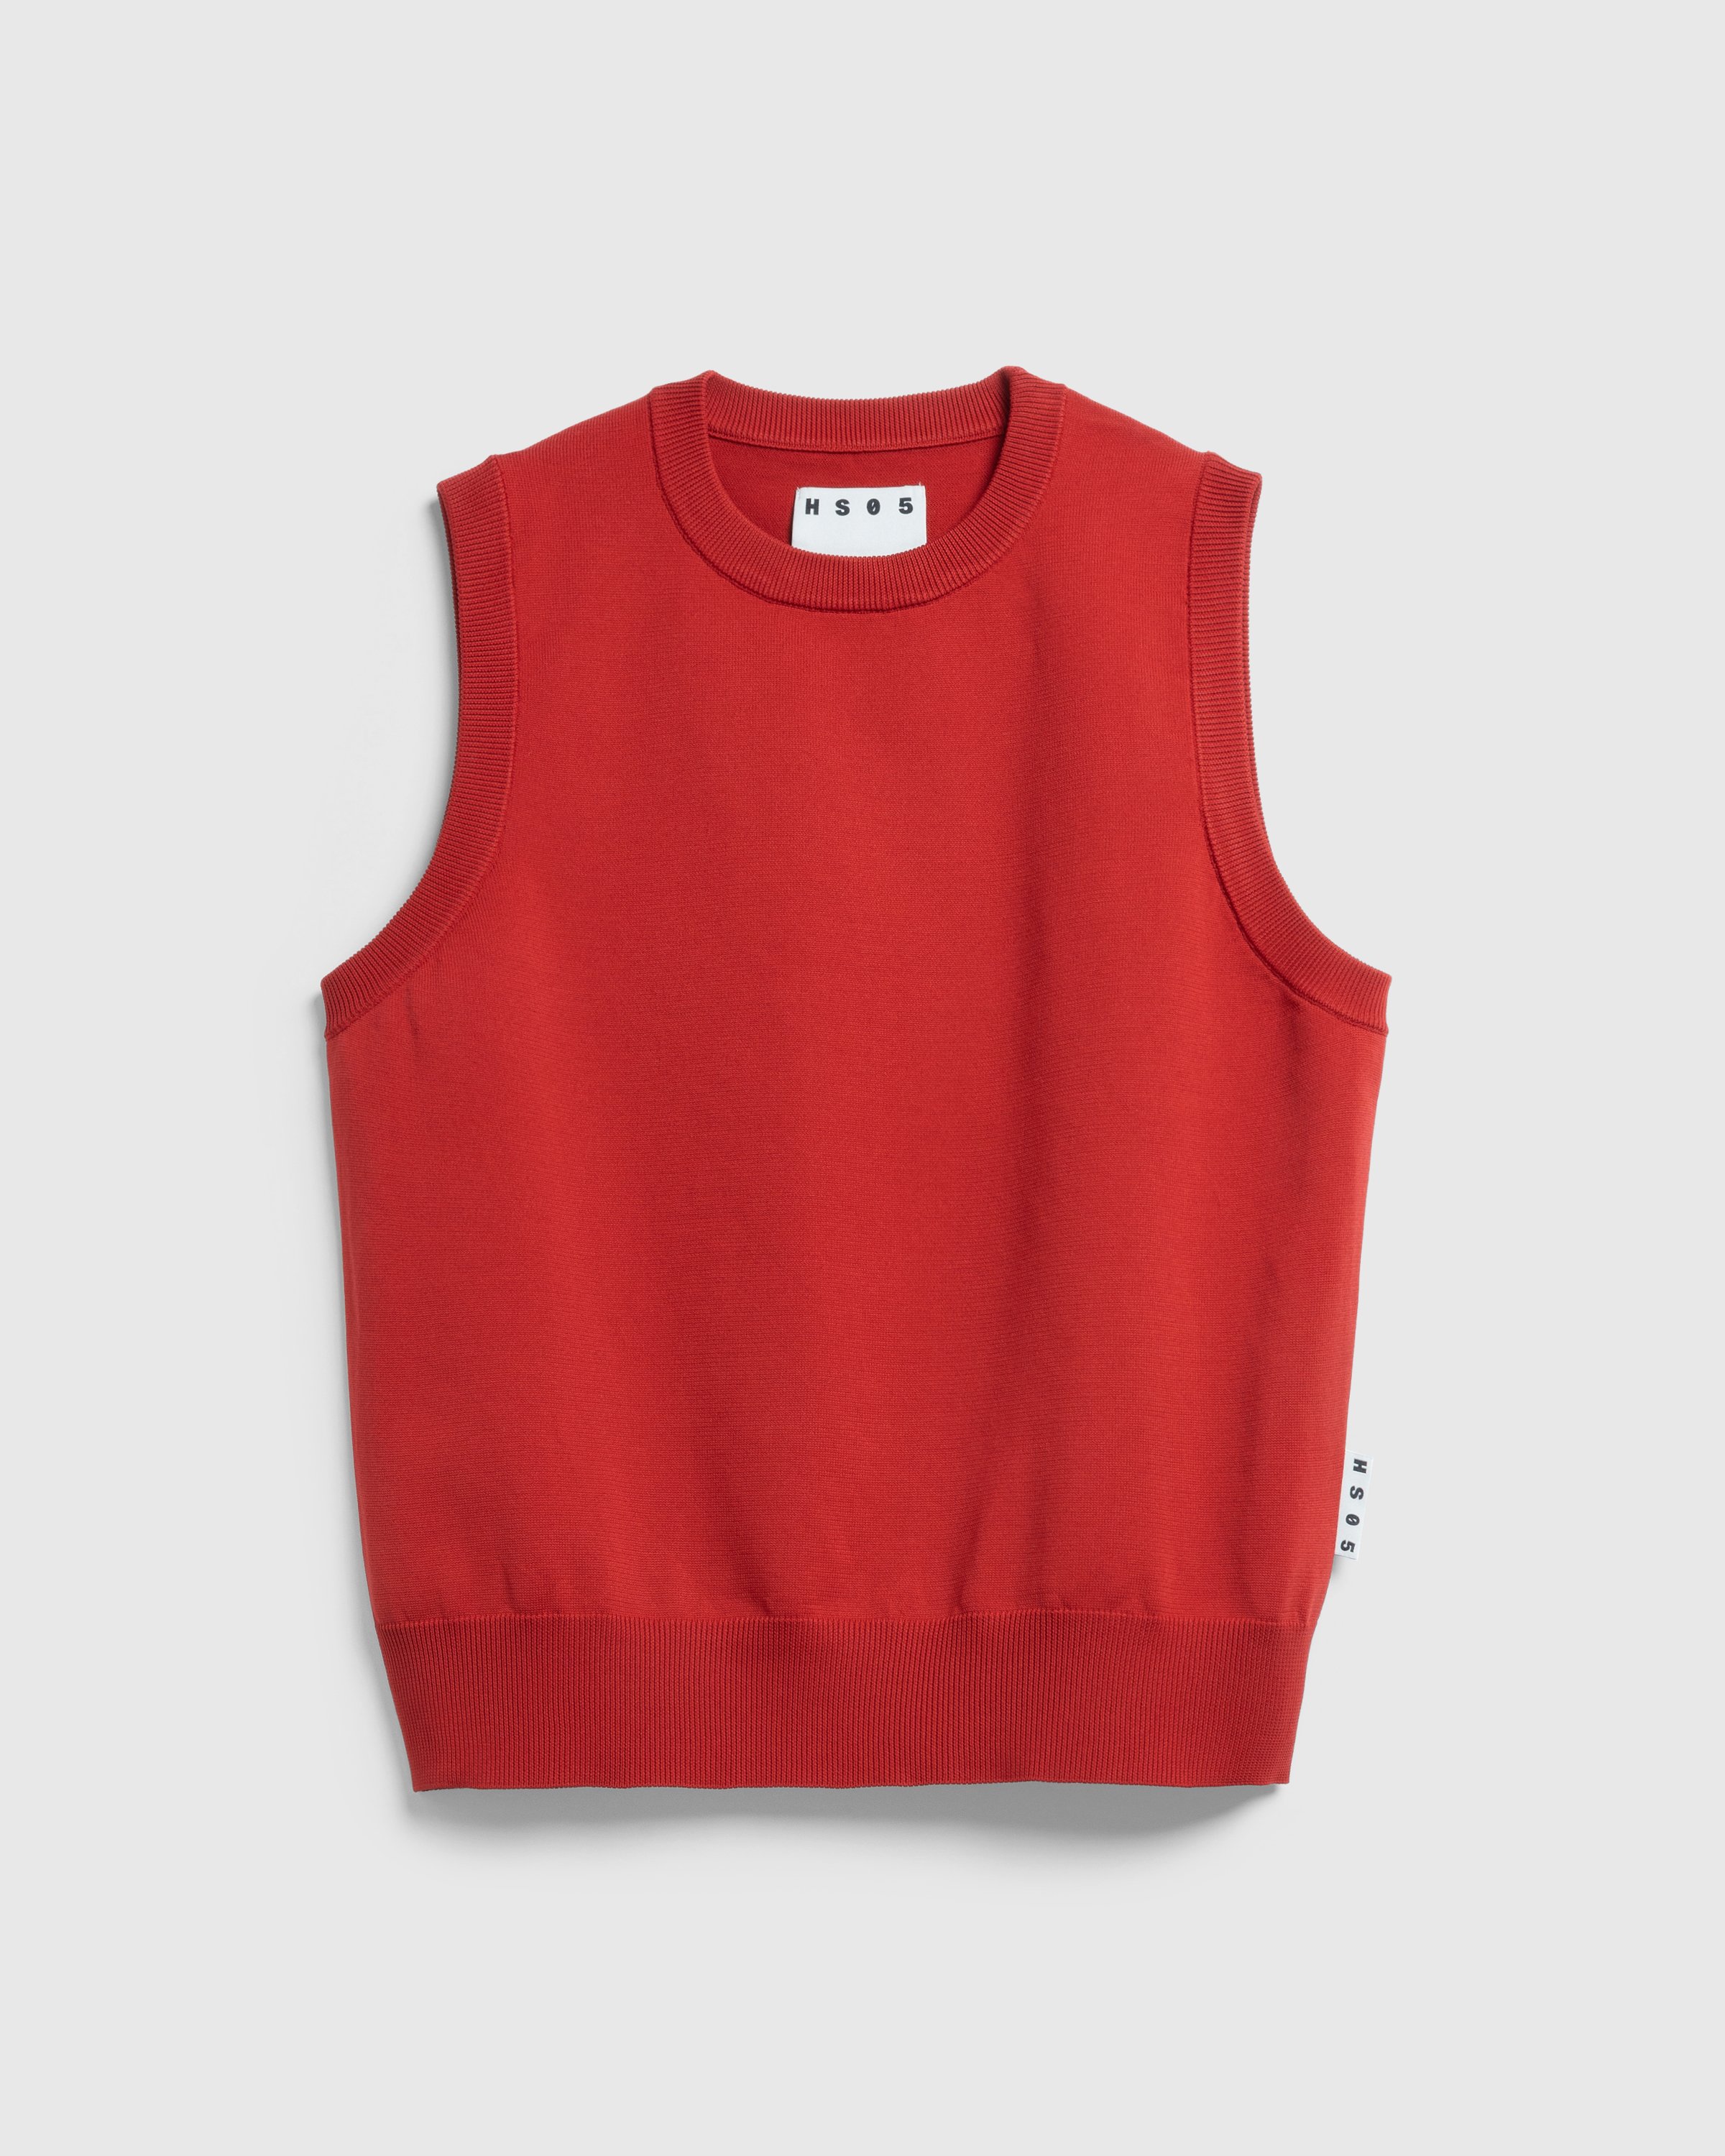 Highsnobiety HS05 - Poly Knit Tank Top Ruby Red - Clothing - Ruby Red - Image 1